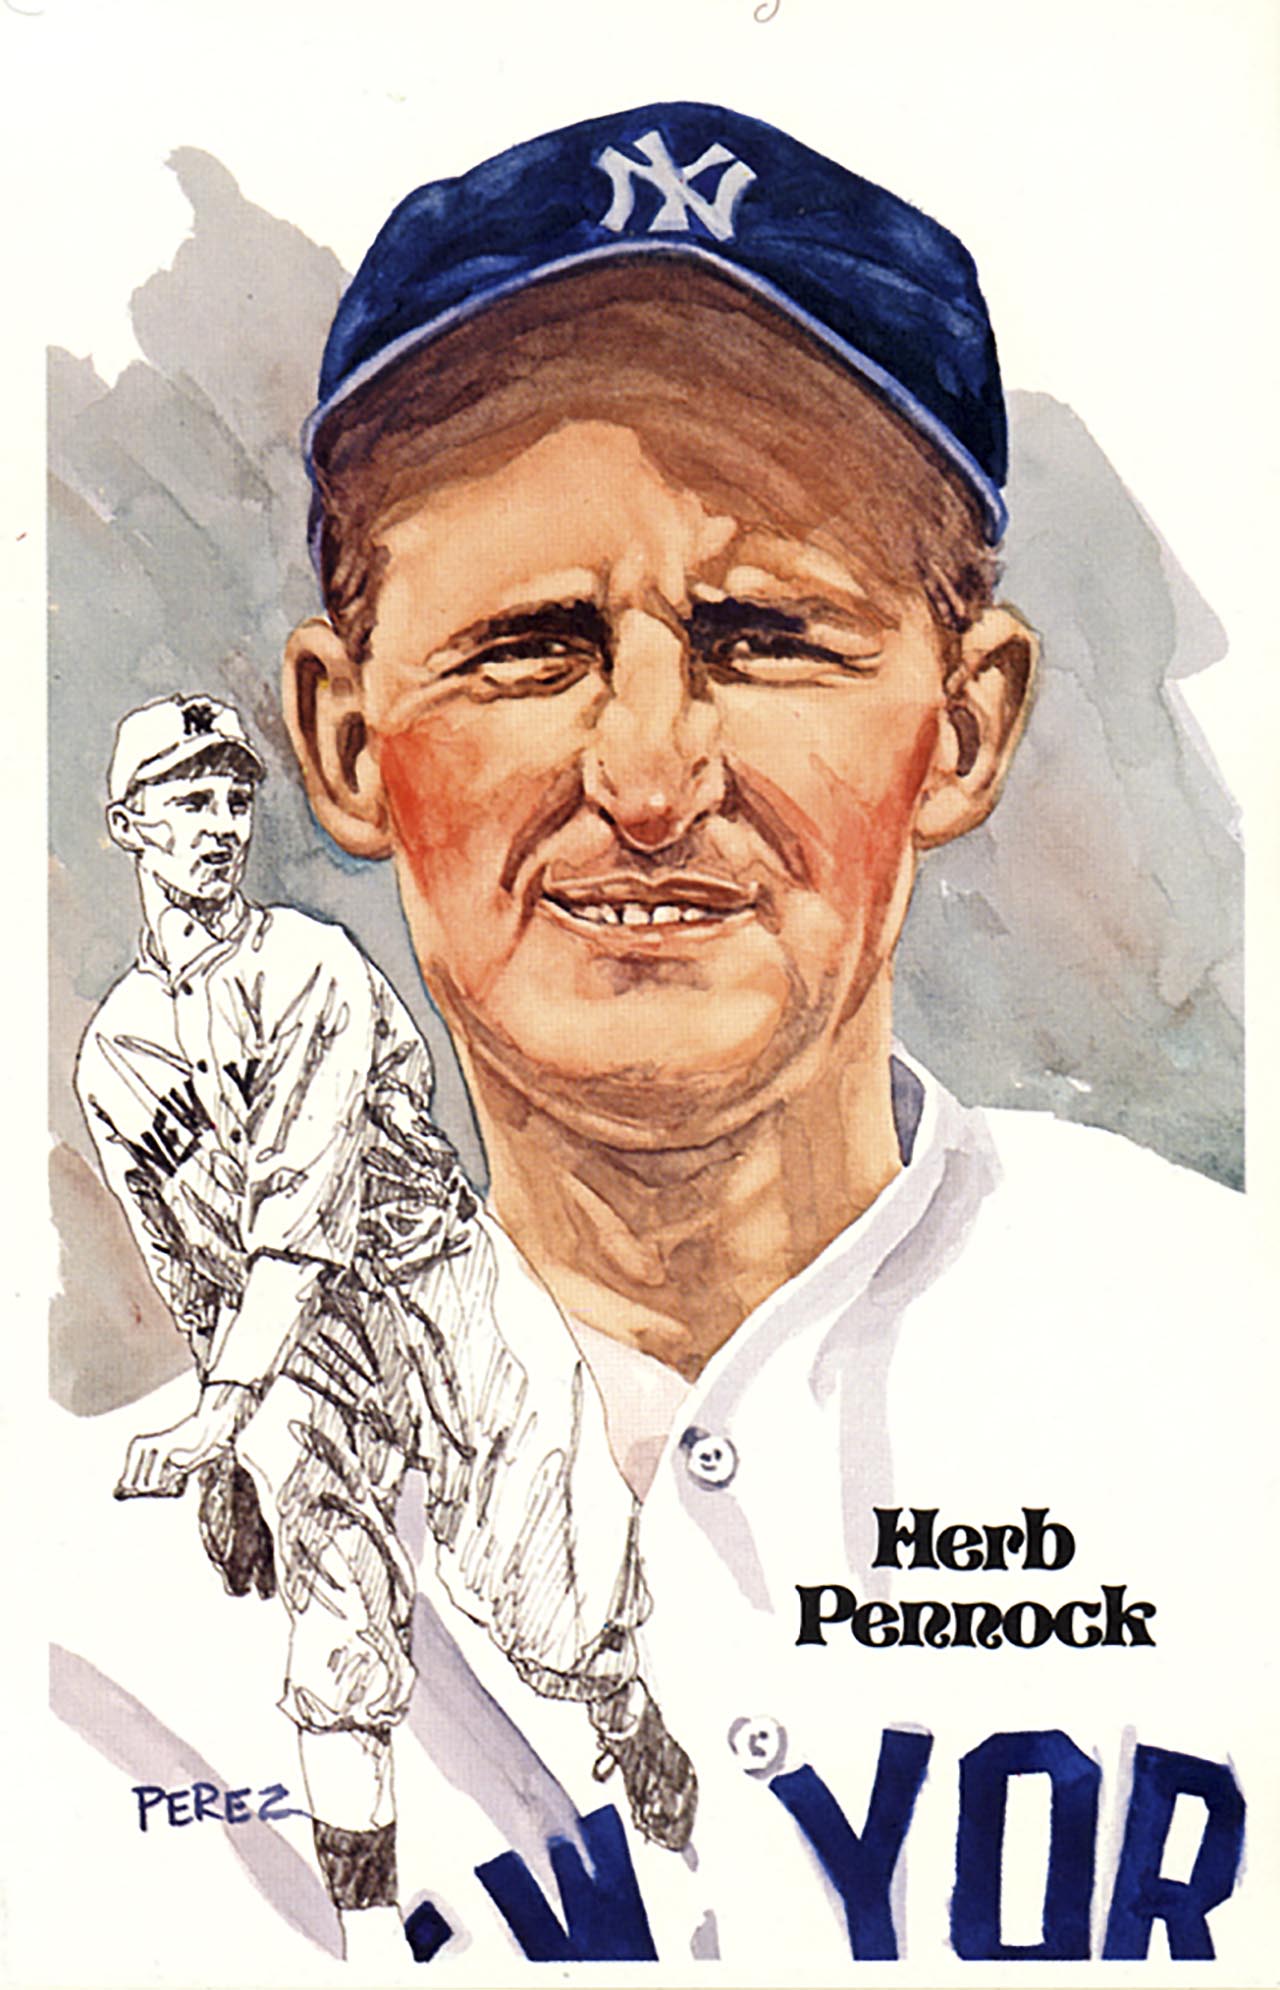 Hall of Fame Art Post Cards Series 2 : Dick Perez1280 x 1990